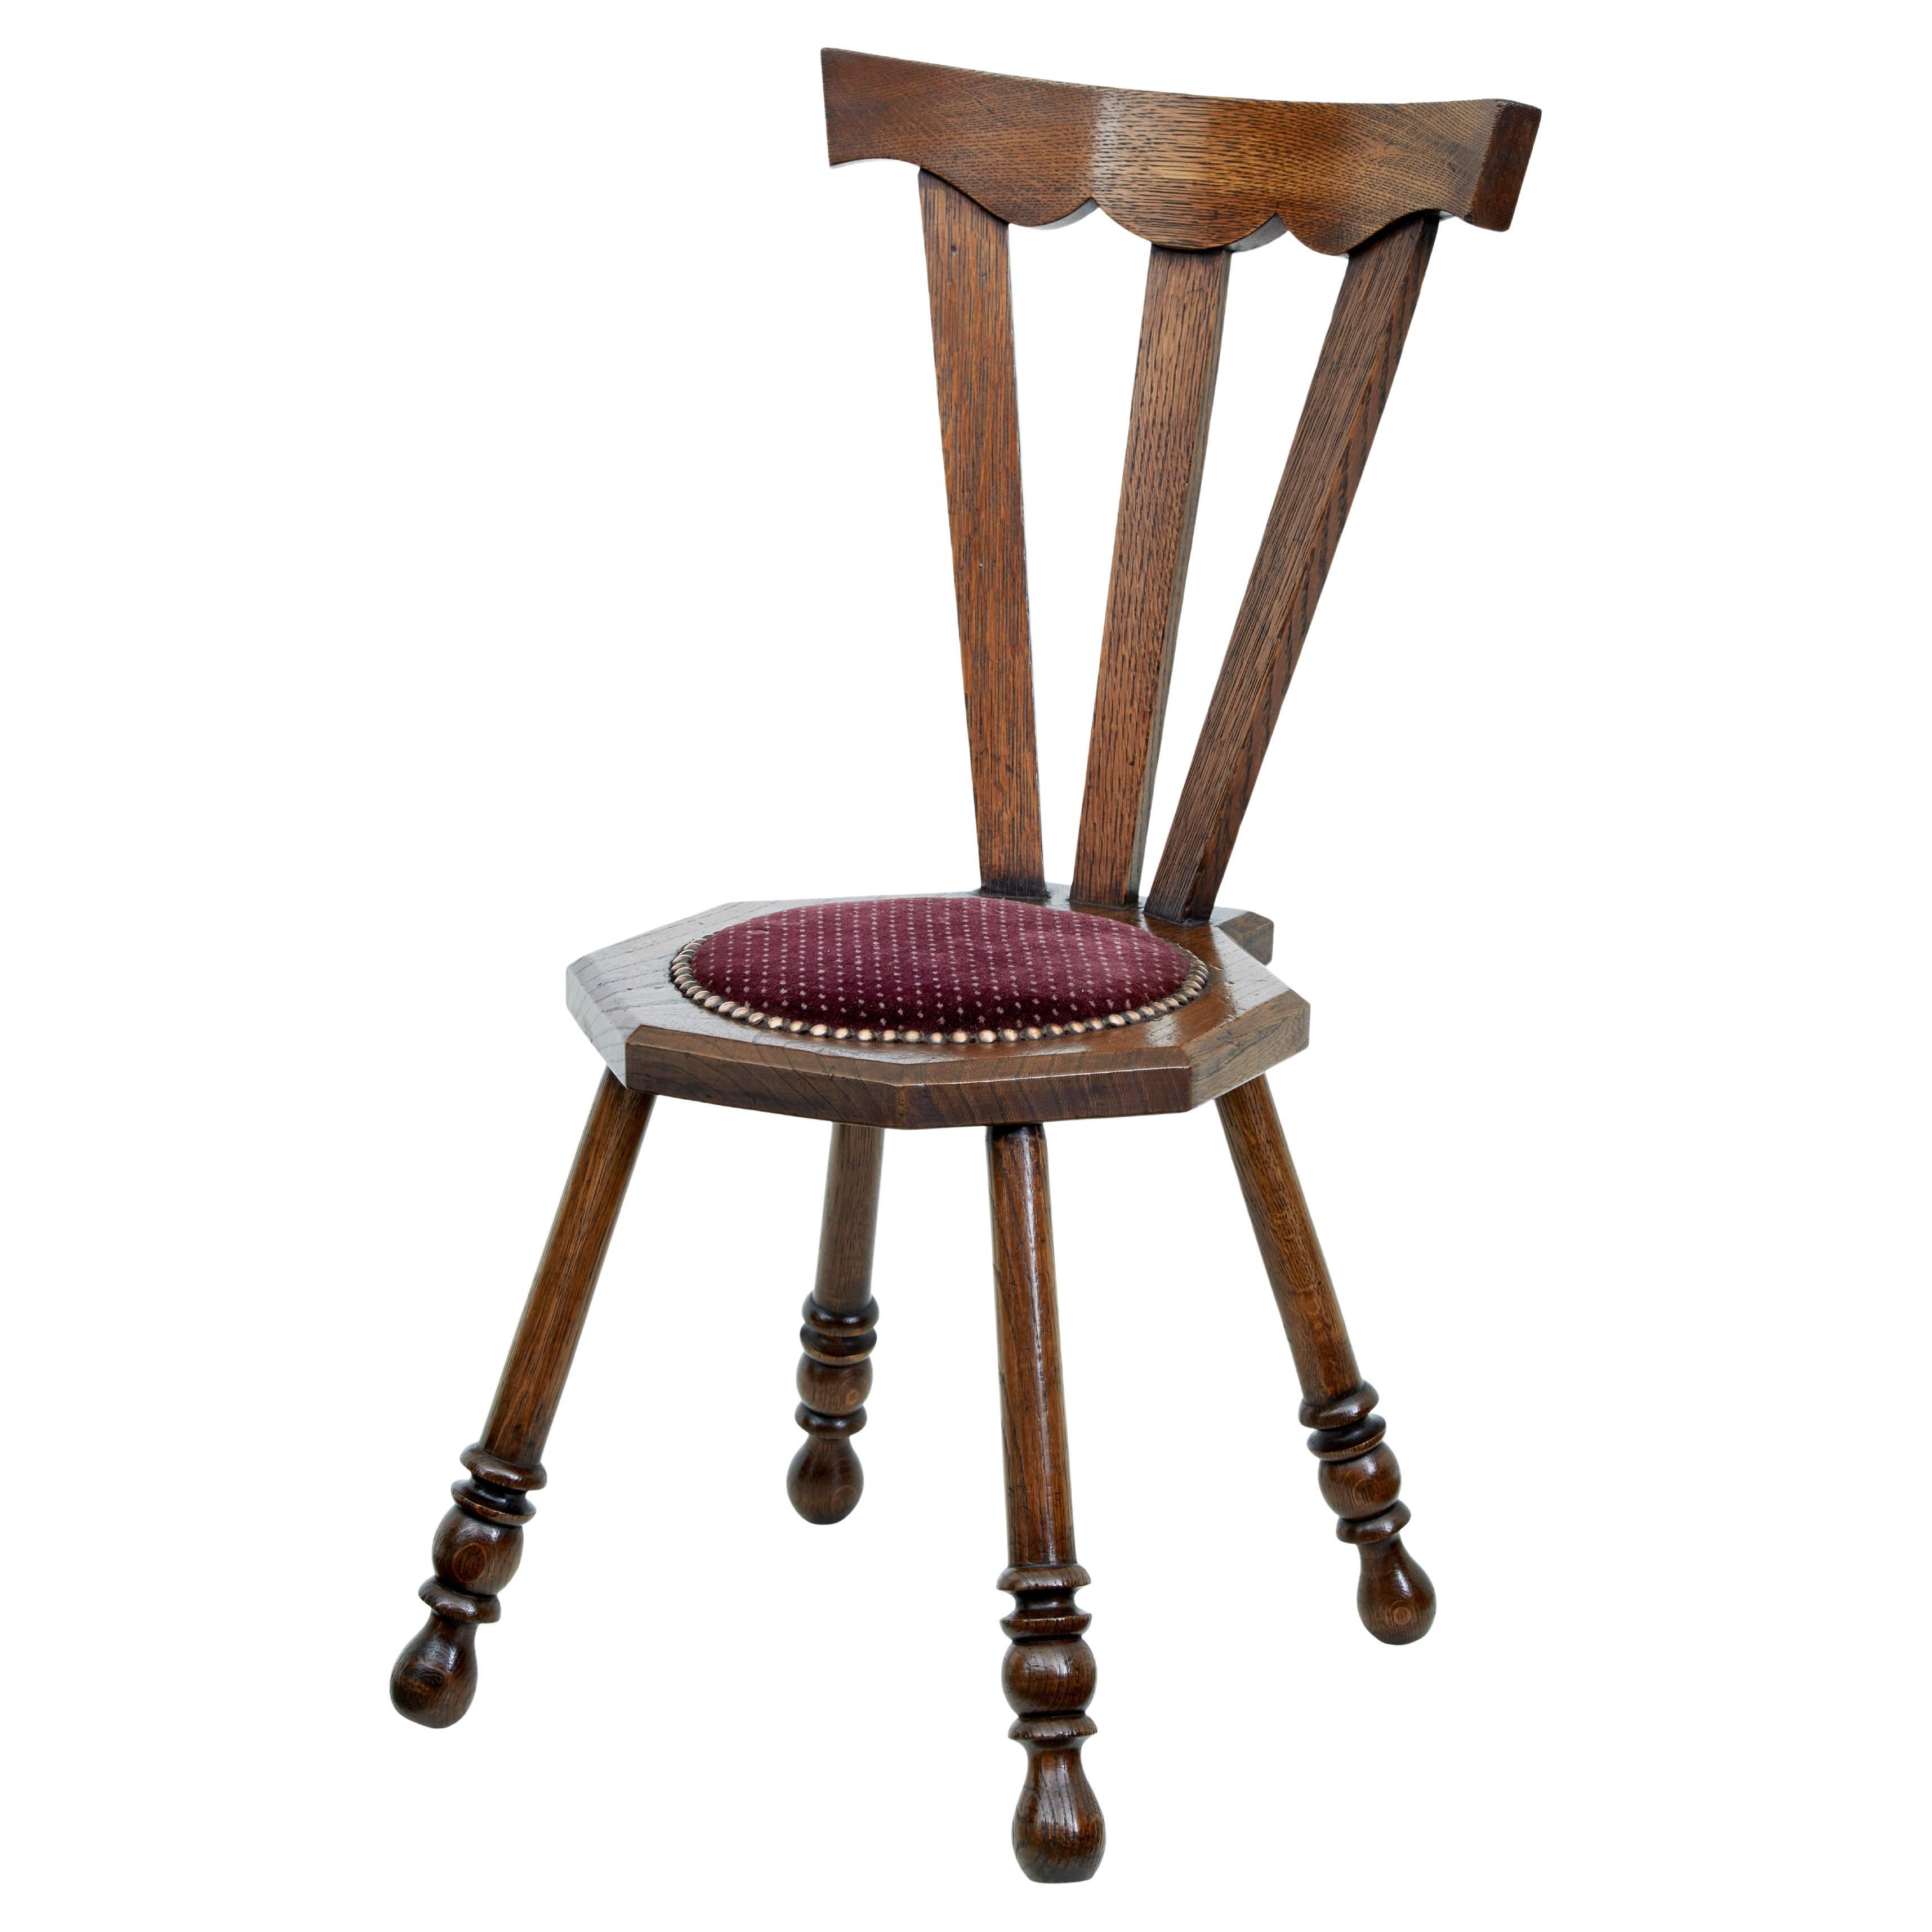 Early 20th century oak arts and crafts childs chair For Sale